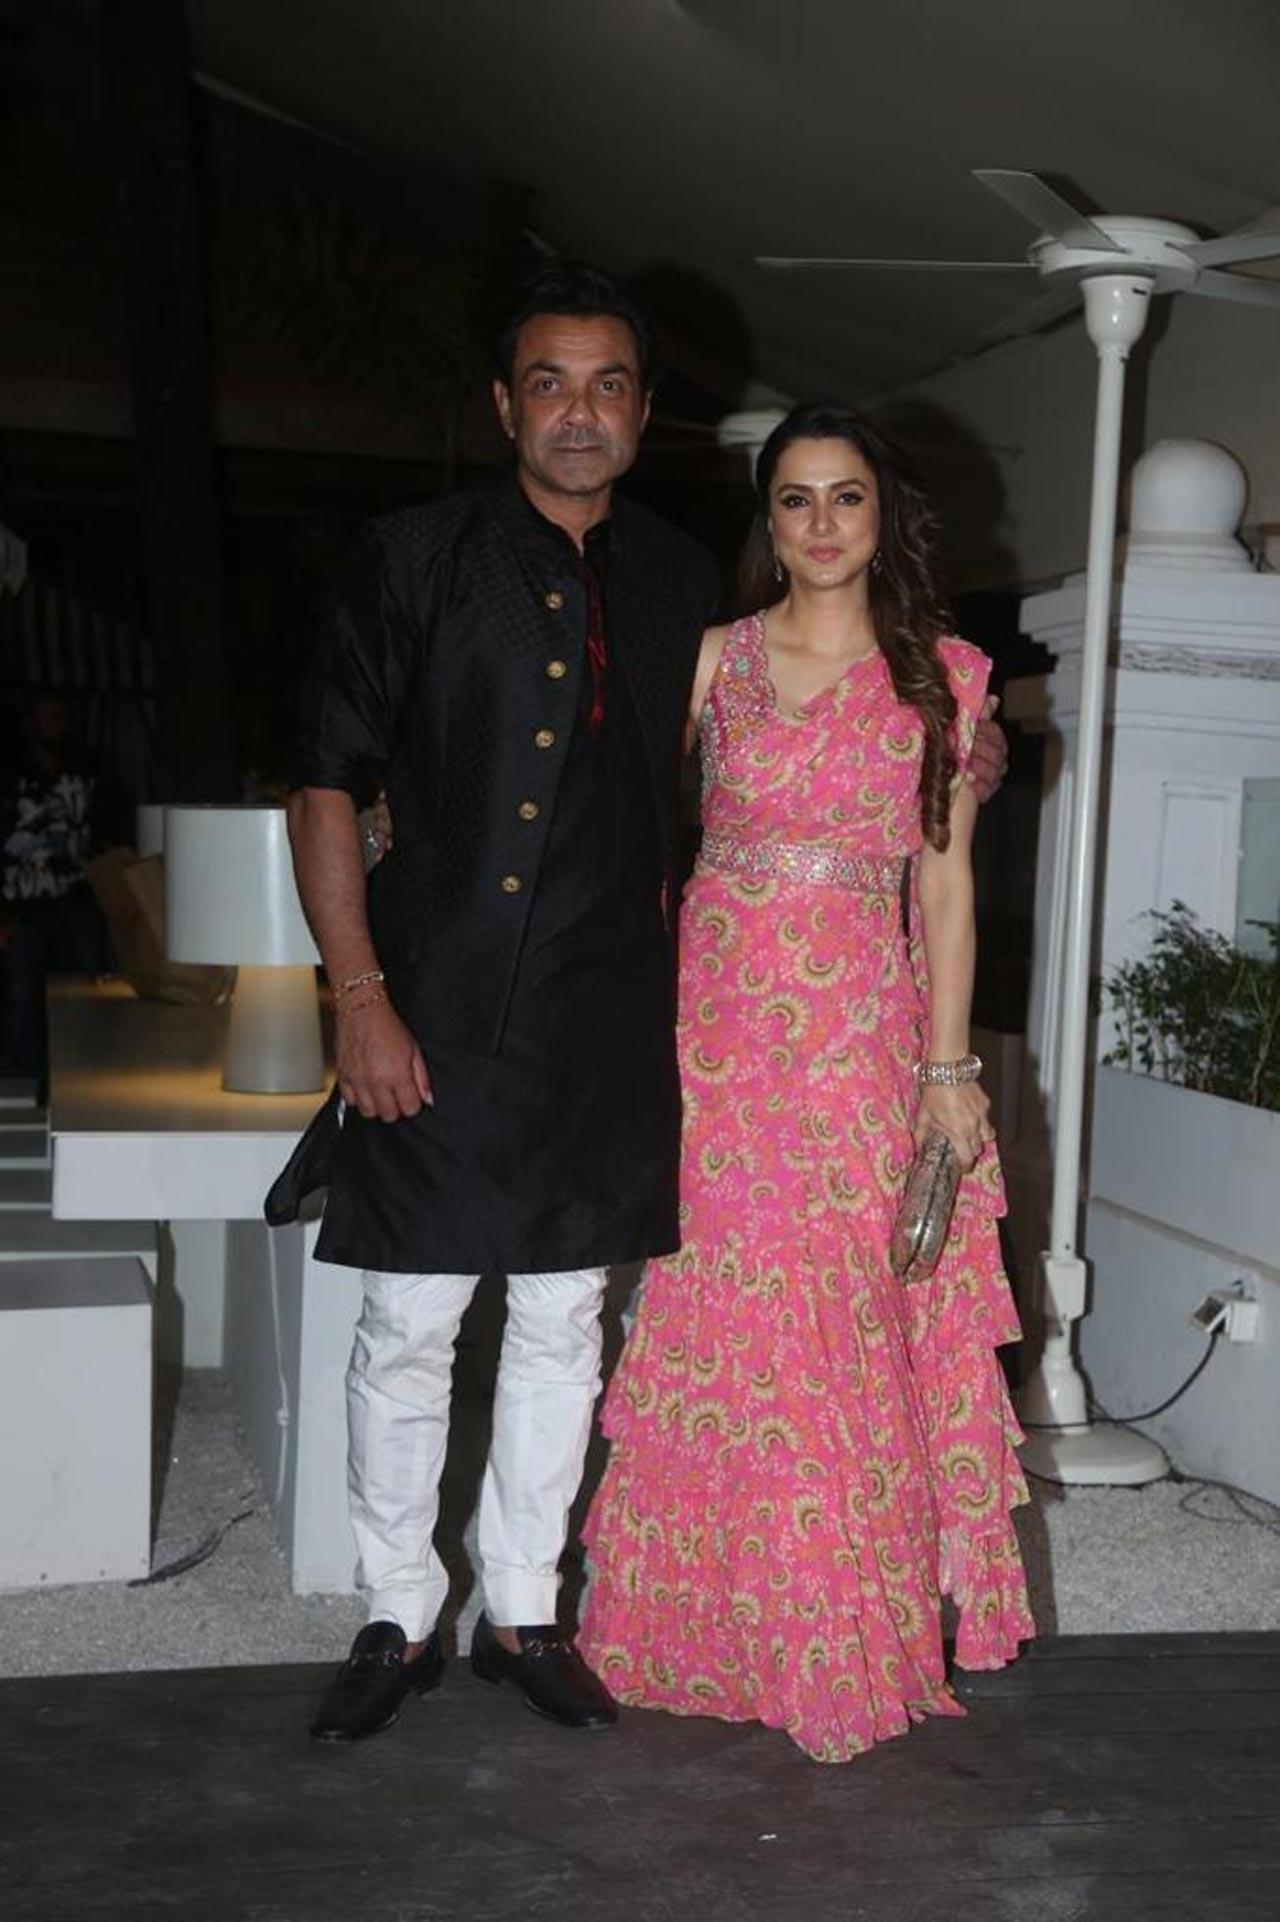 Bobby Deol and his wife looked ethereal in Indian outfits